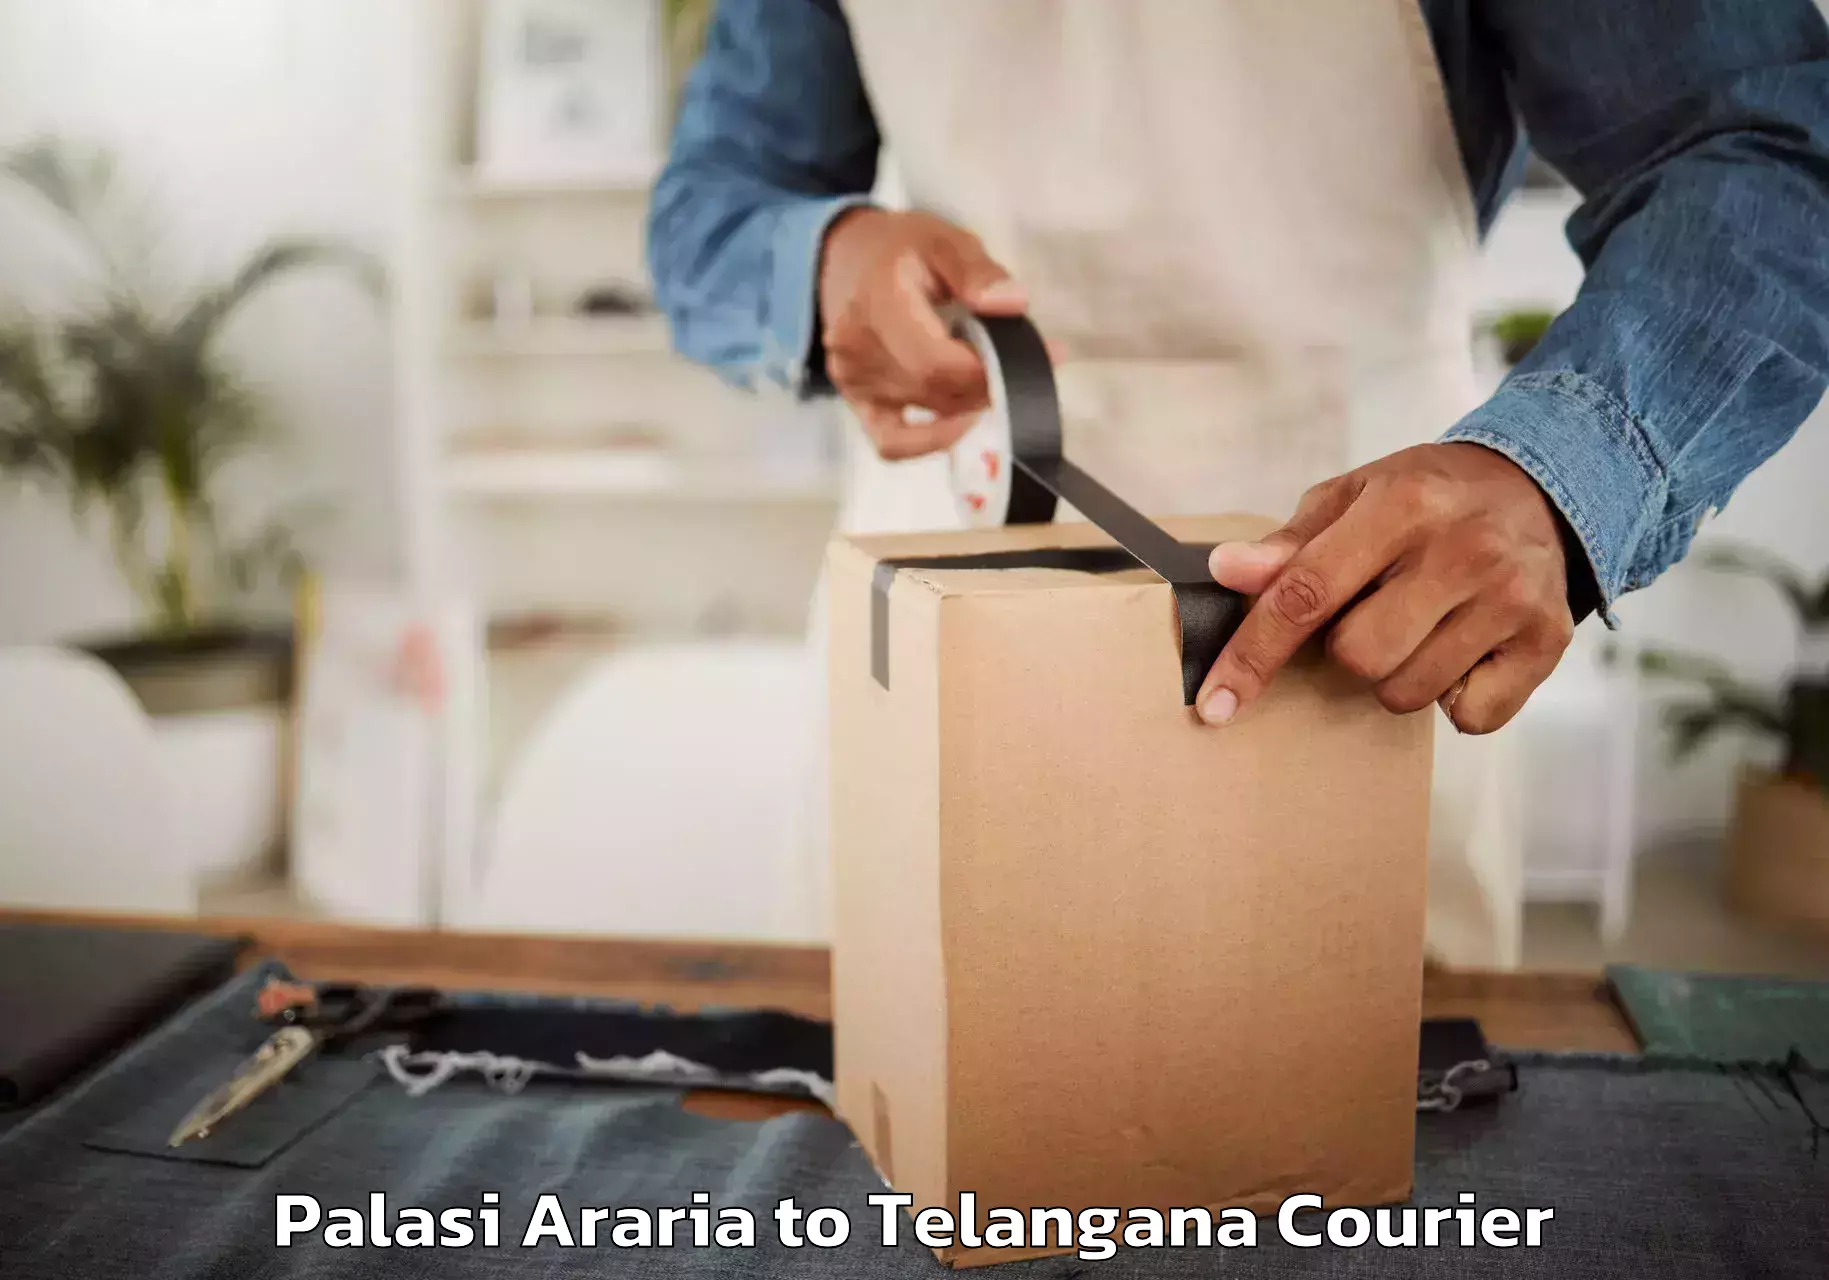 Reliable goods transport in Palasi Araria to Eligedu